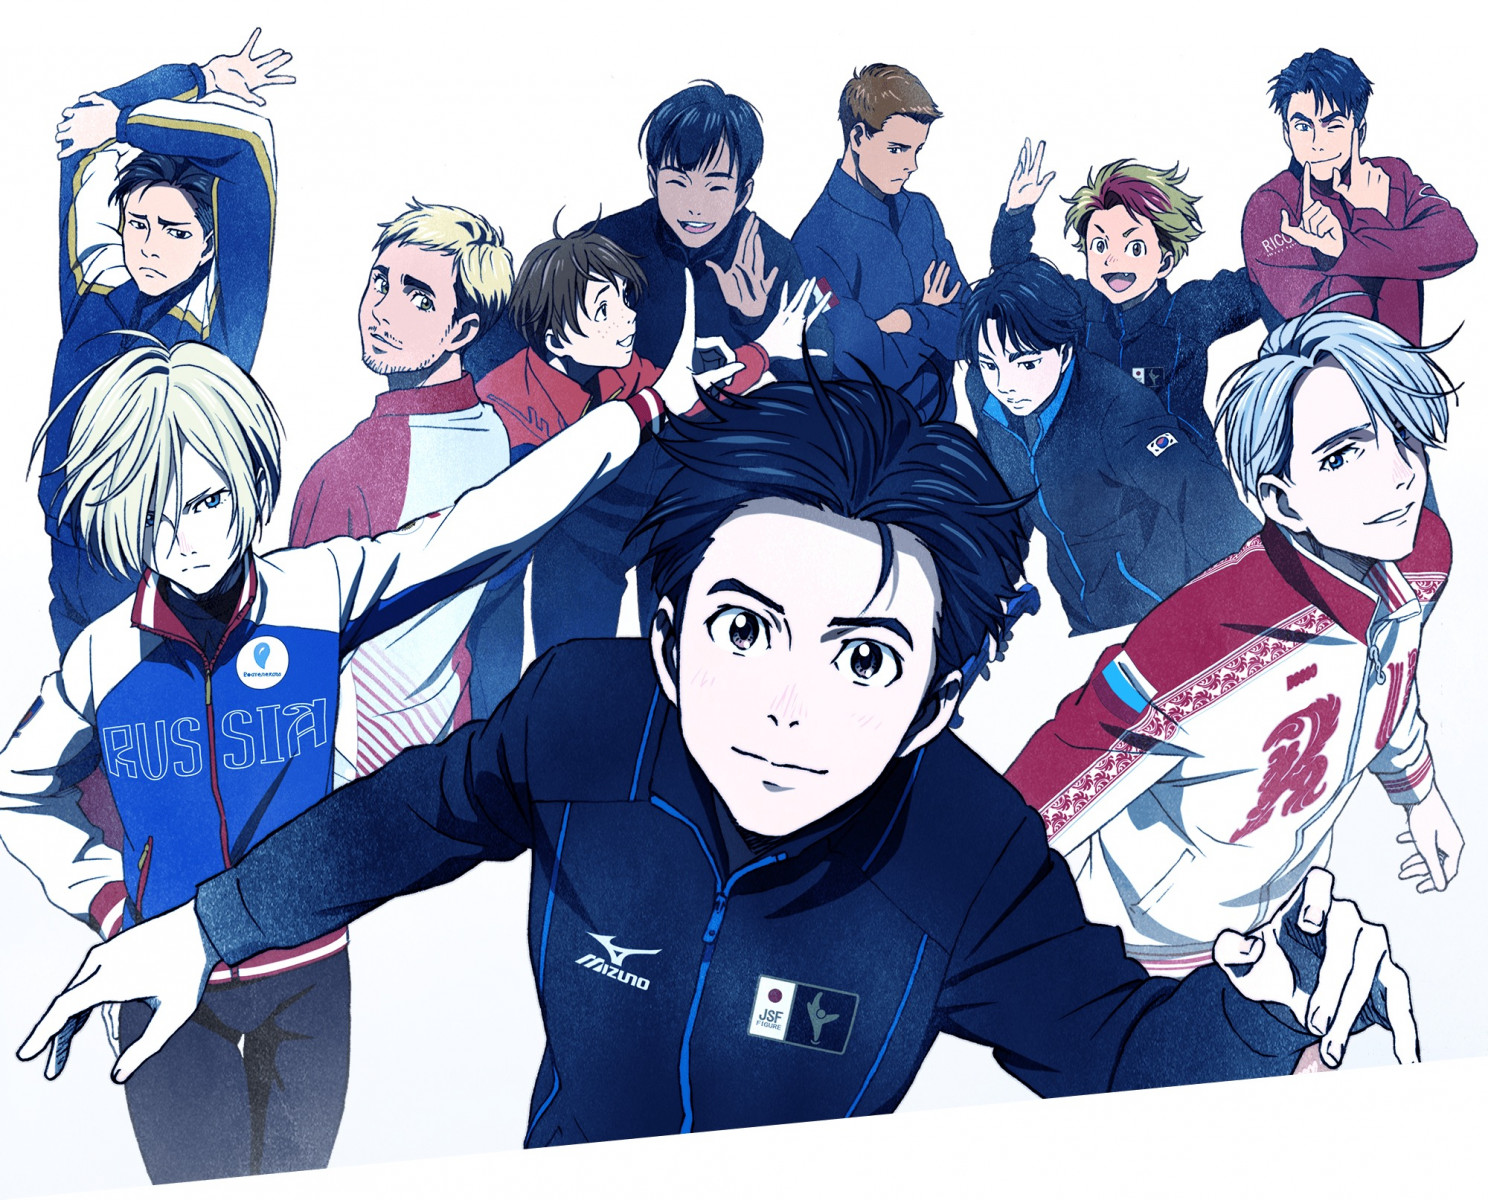 Yuri!!! on Ice Characters and the Real Life Figure Skaters Who Inspired Them!